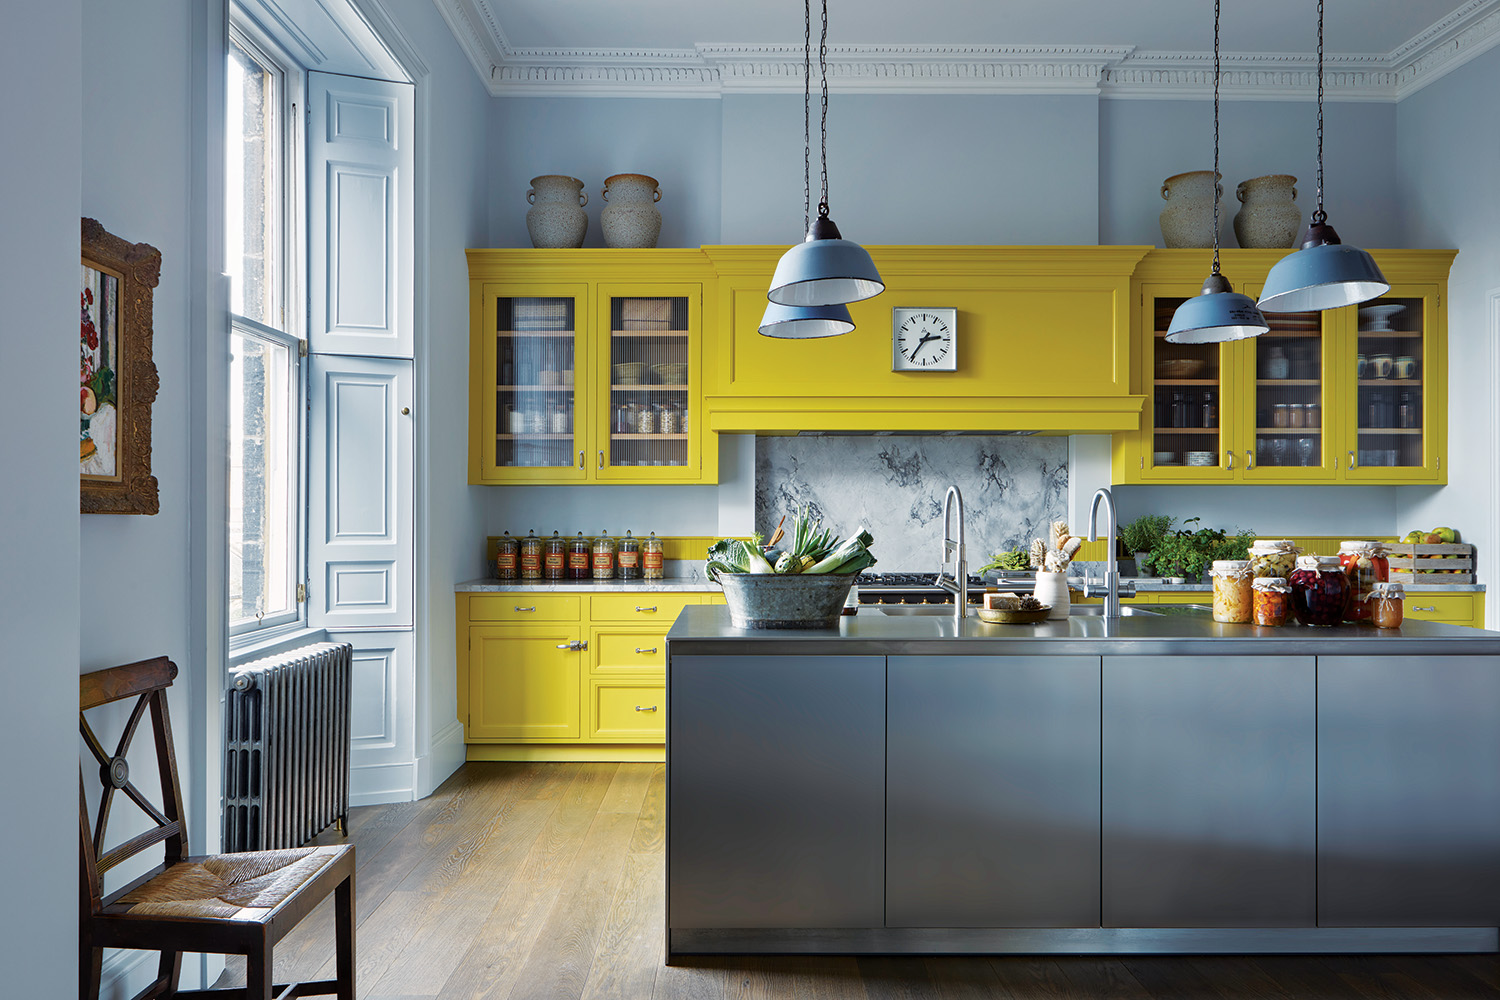 6 Interior Design Experts Reveal How to Craft a Dream Kitchen